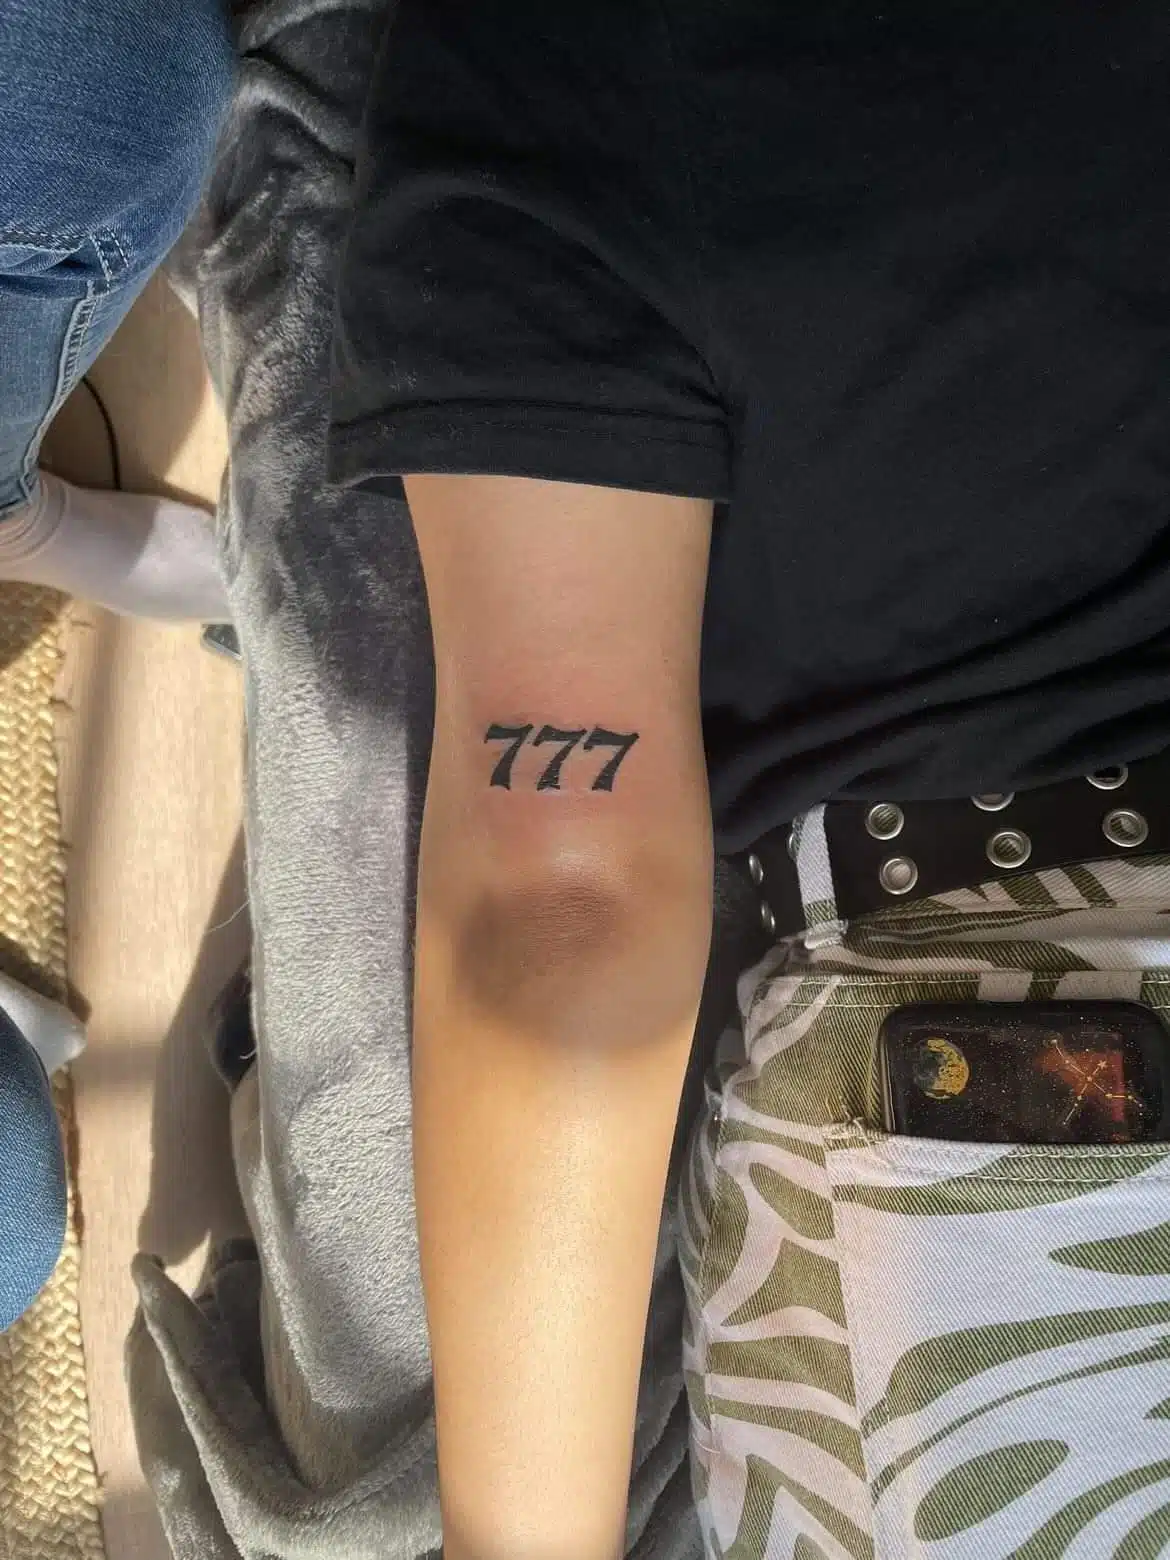 Elbow 777 angel number tattoo